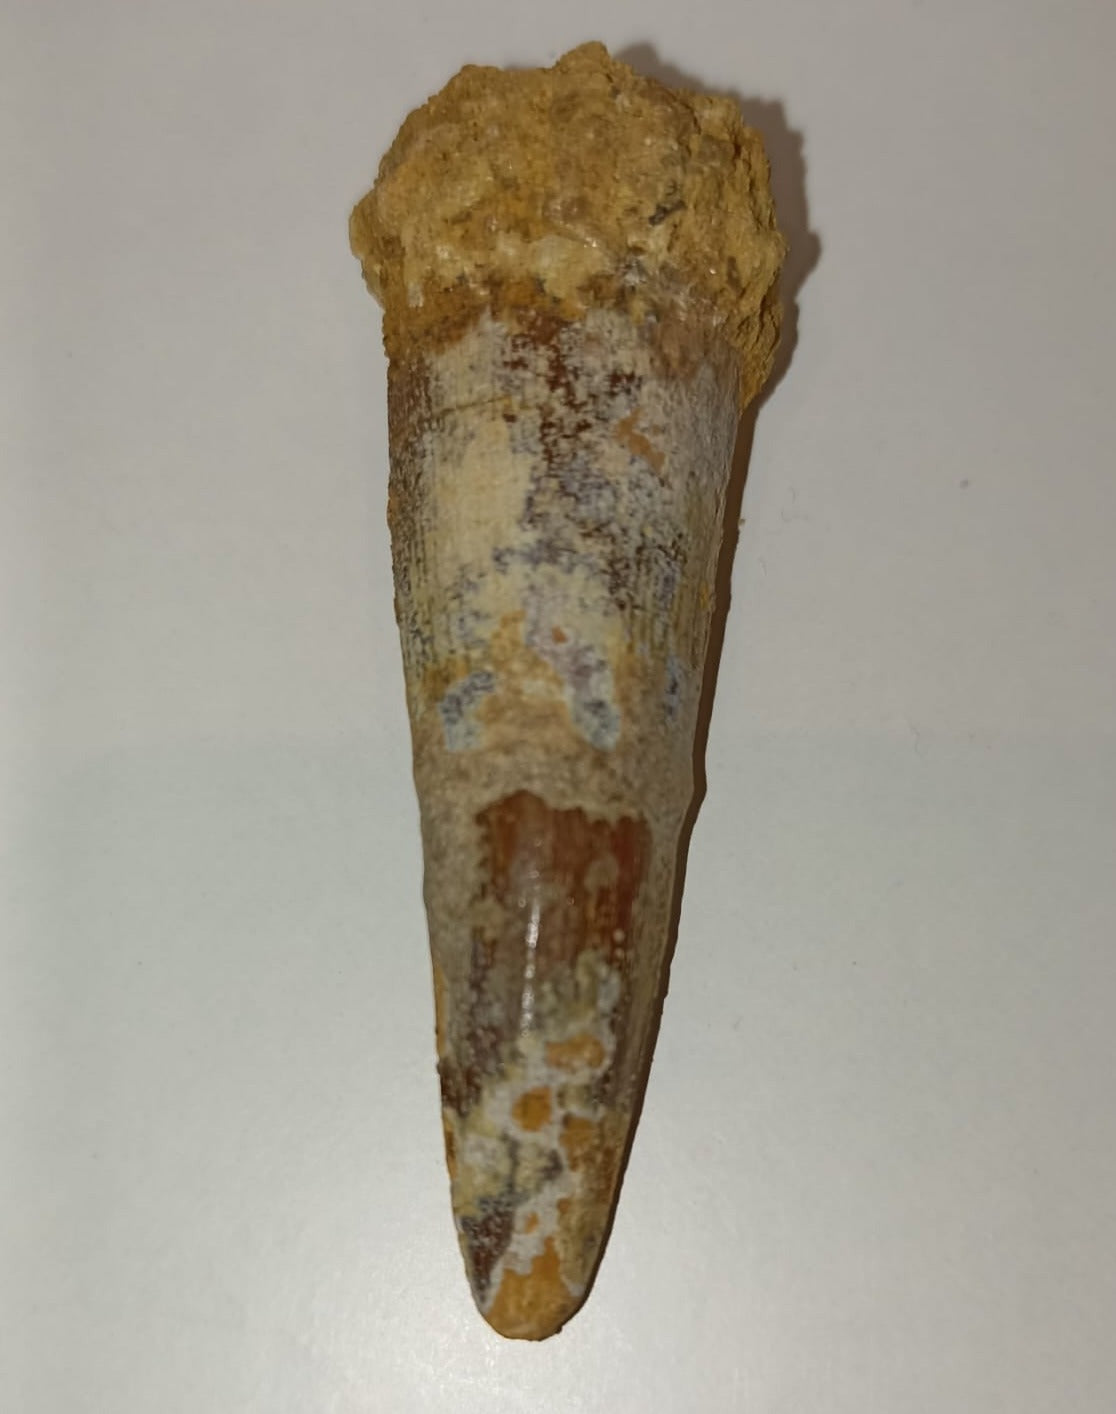 6.5cm Spinosaurus (Dinosaur) Tooth from Morocco<br>(95 million years)<br>